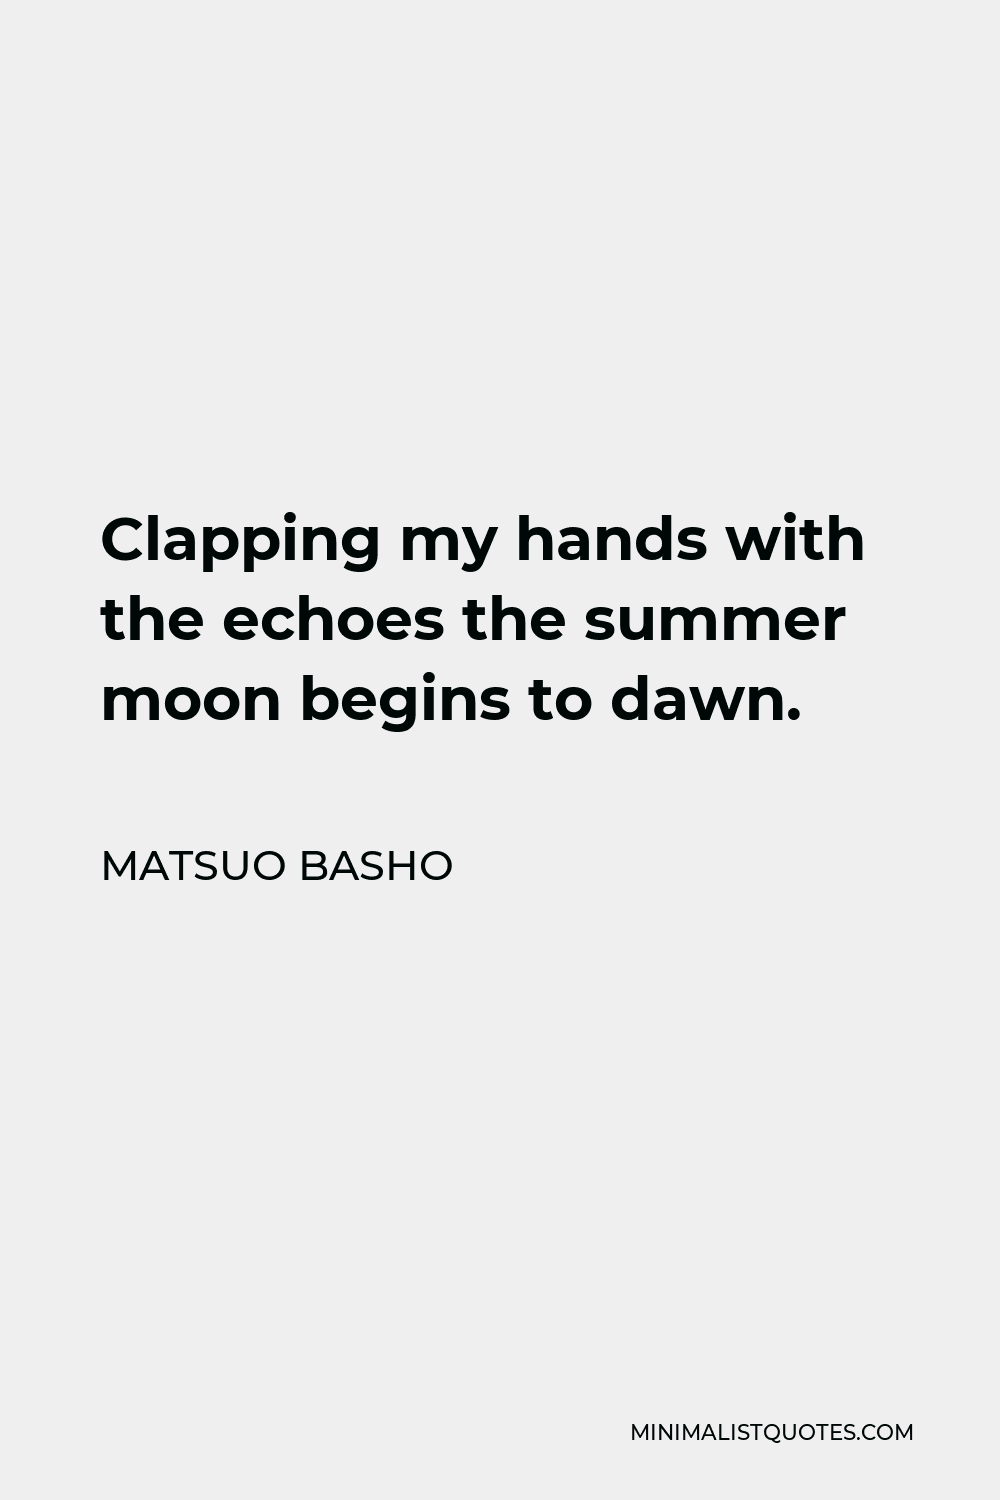 Matsuo Basho Quote - Clapping my hands with the echoes the summer moon begins to dawn.